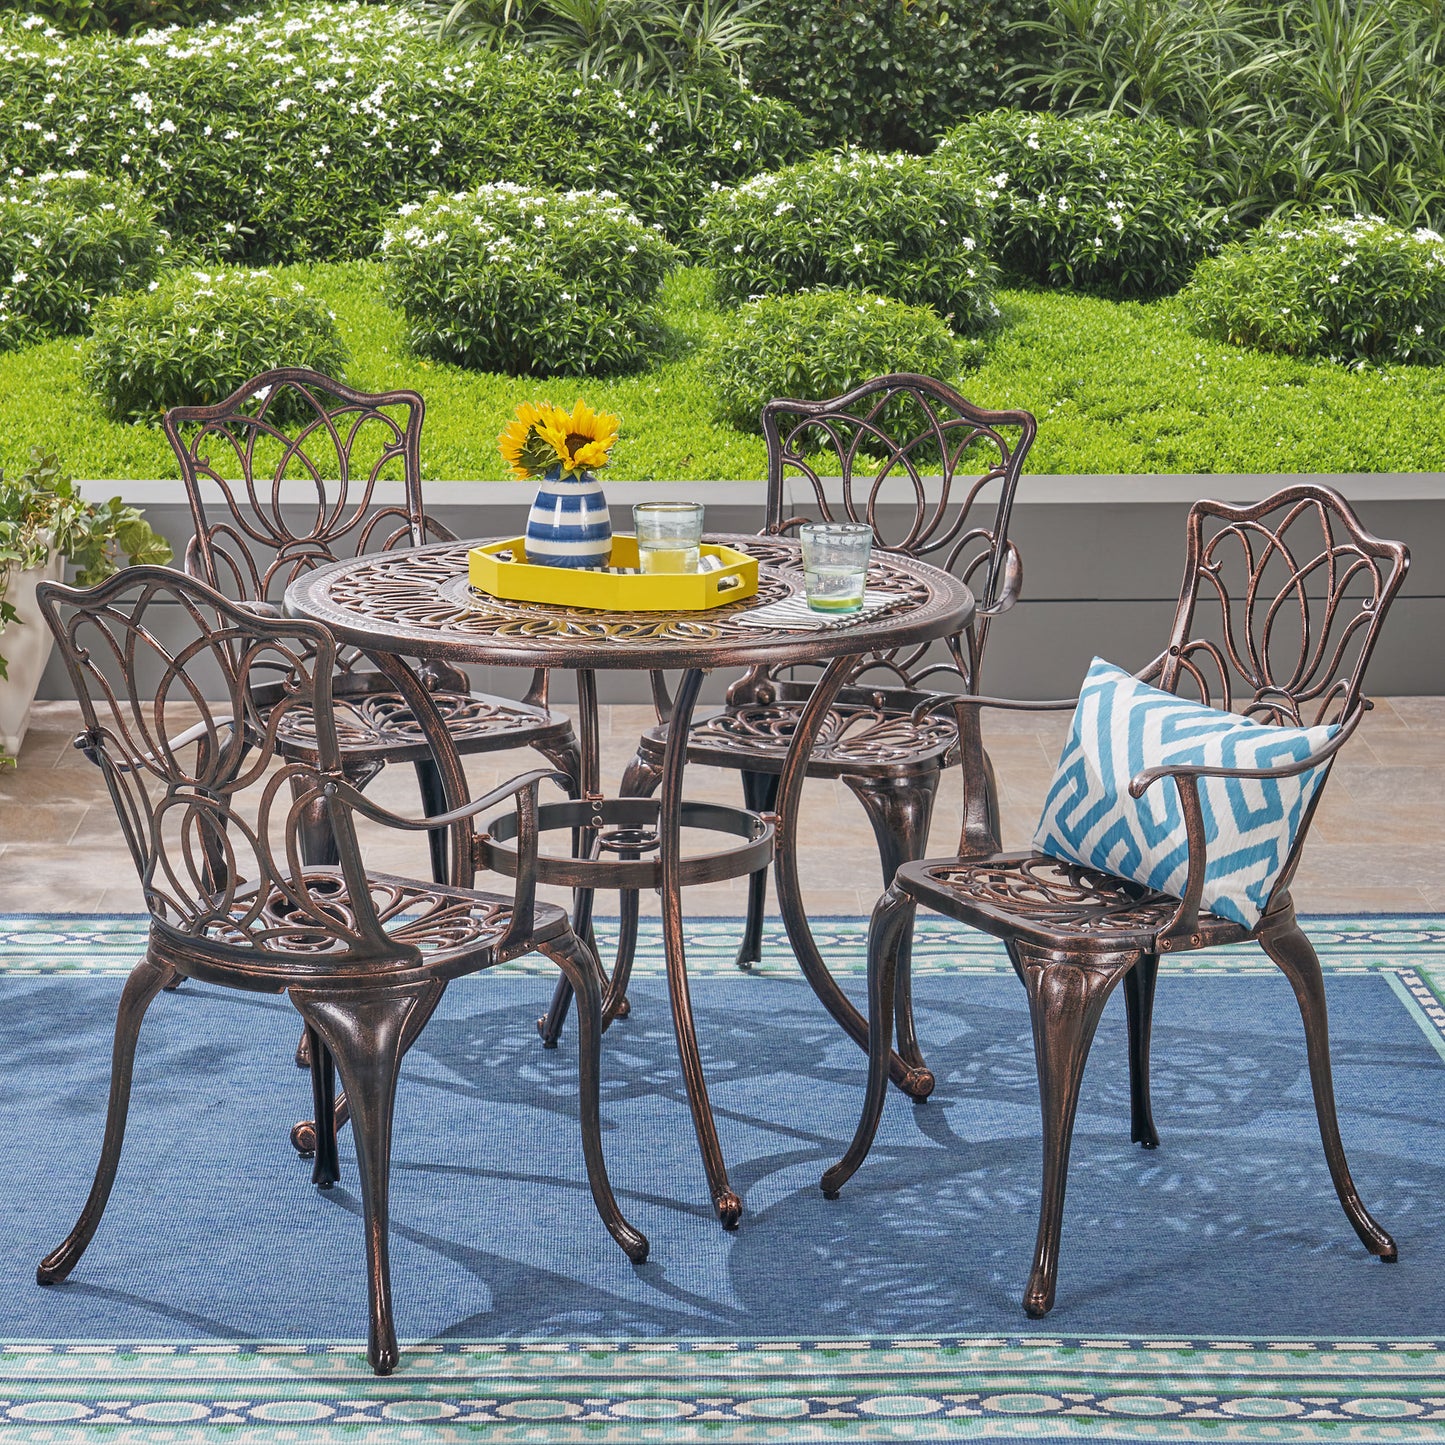 Barbara Outdoor 4-Seater Cast Aluminum Round-Table Dining Set, Shiny Copper